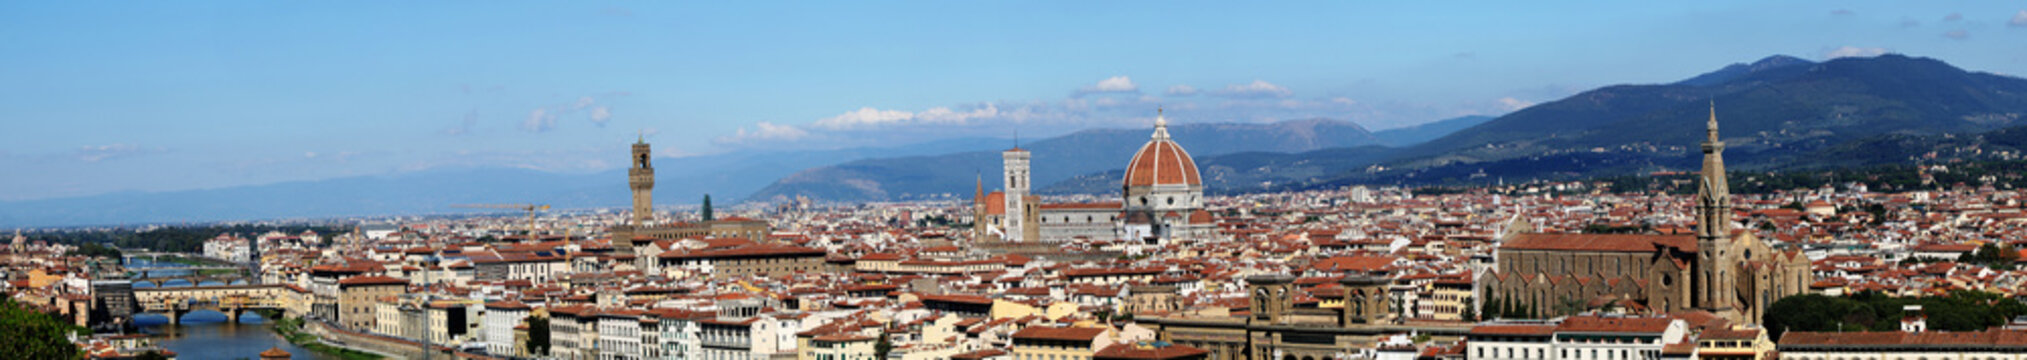 Panorama - Florence, Italy, the ancient city of the arts.